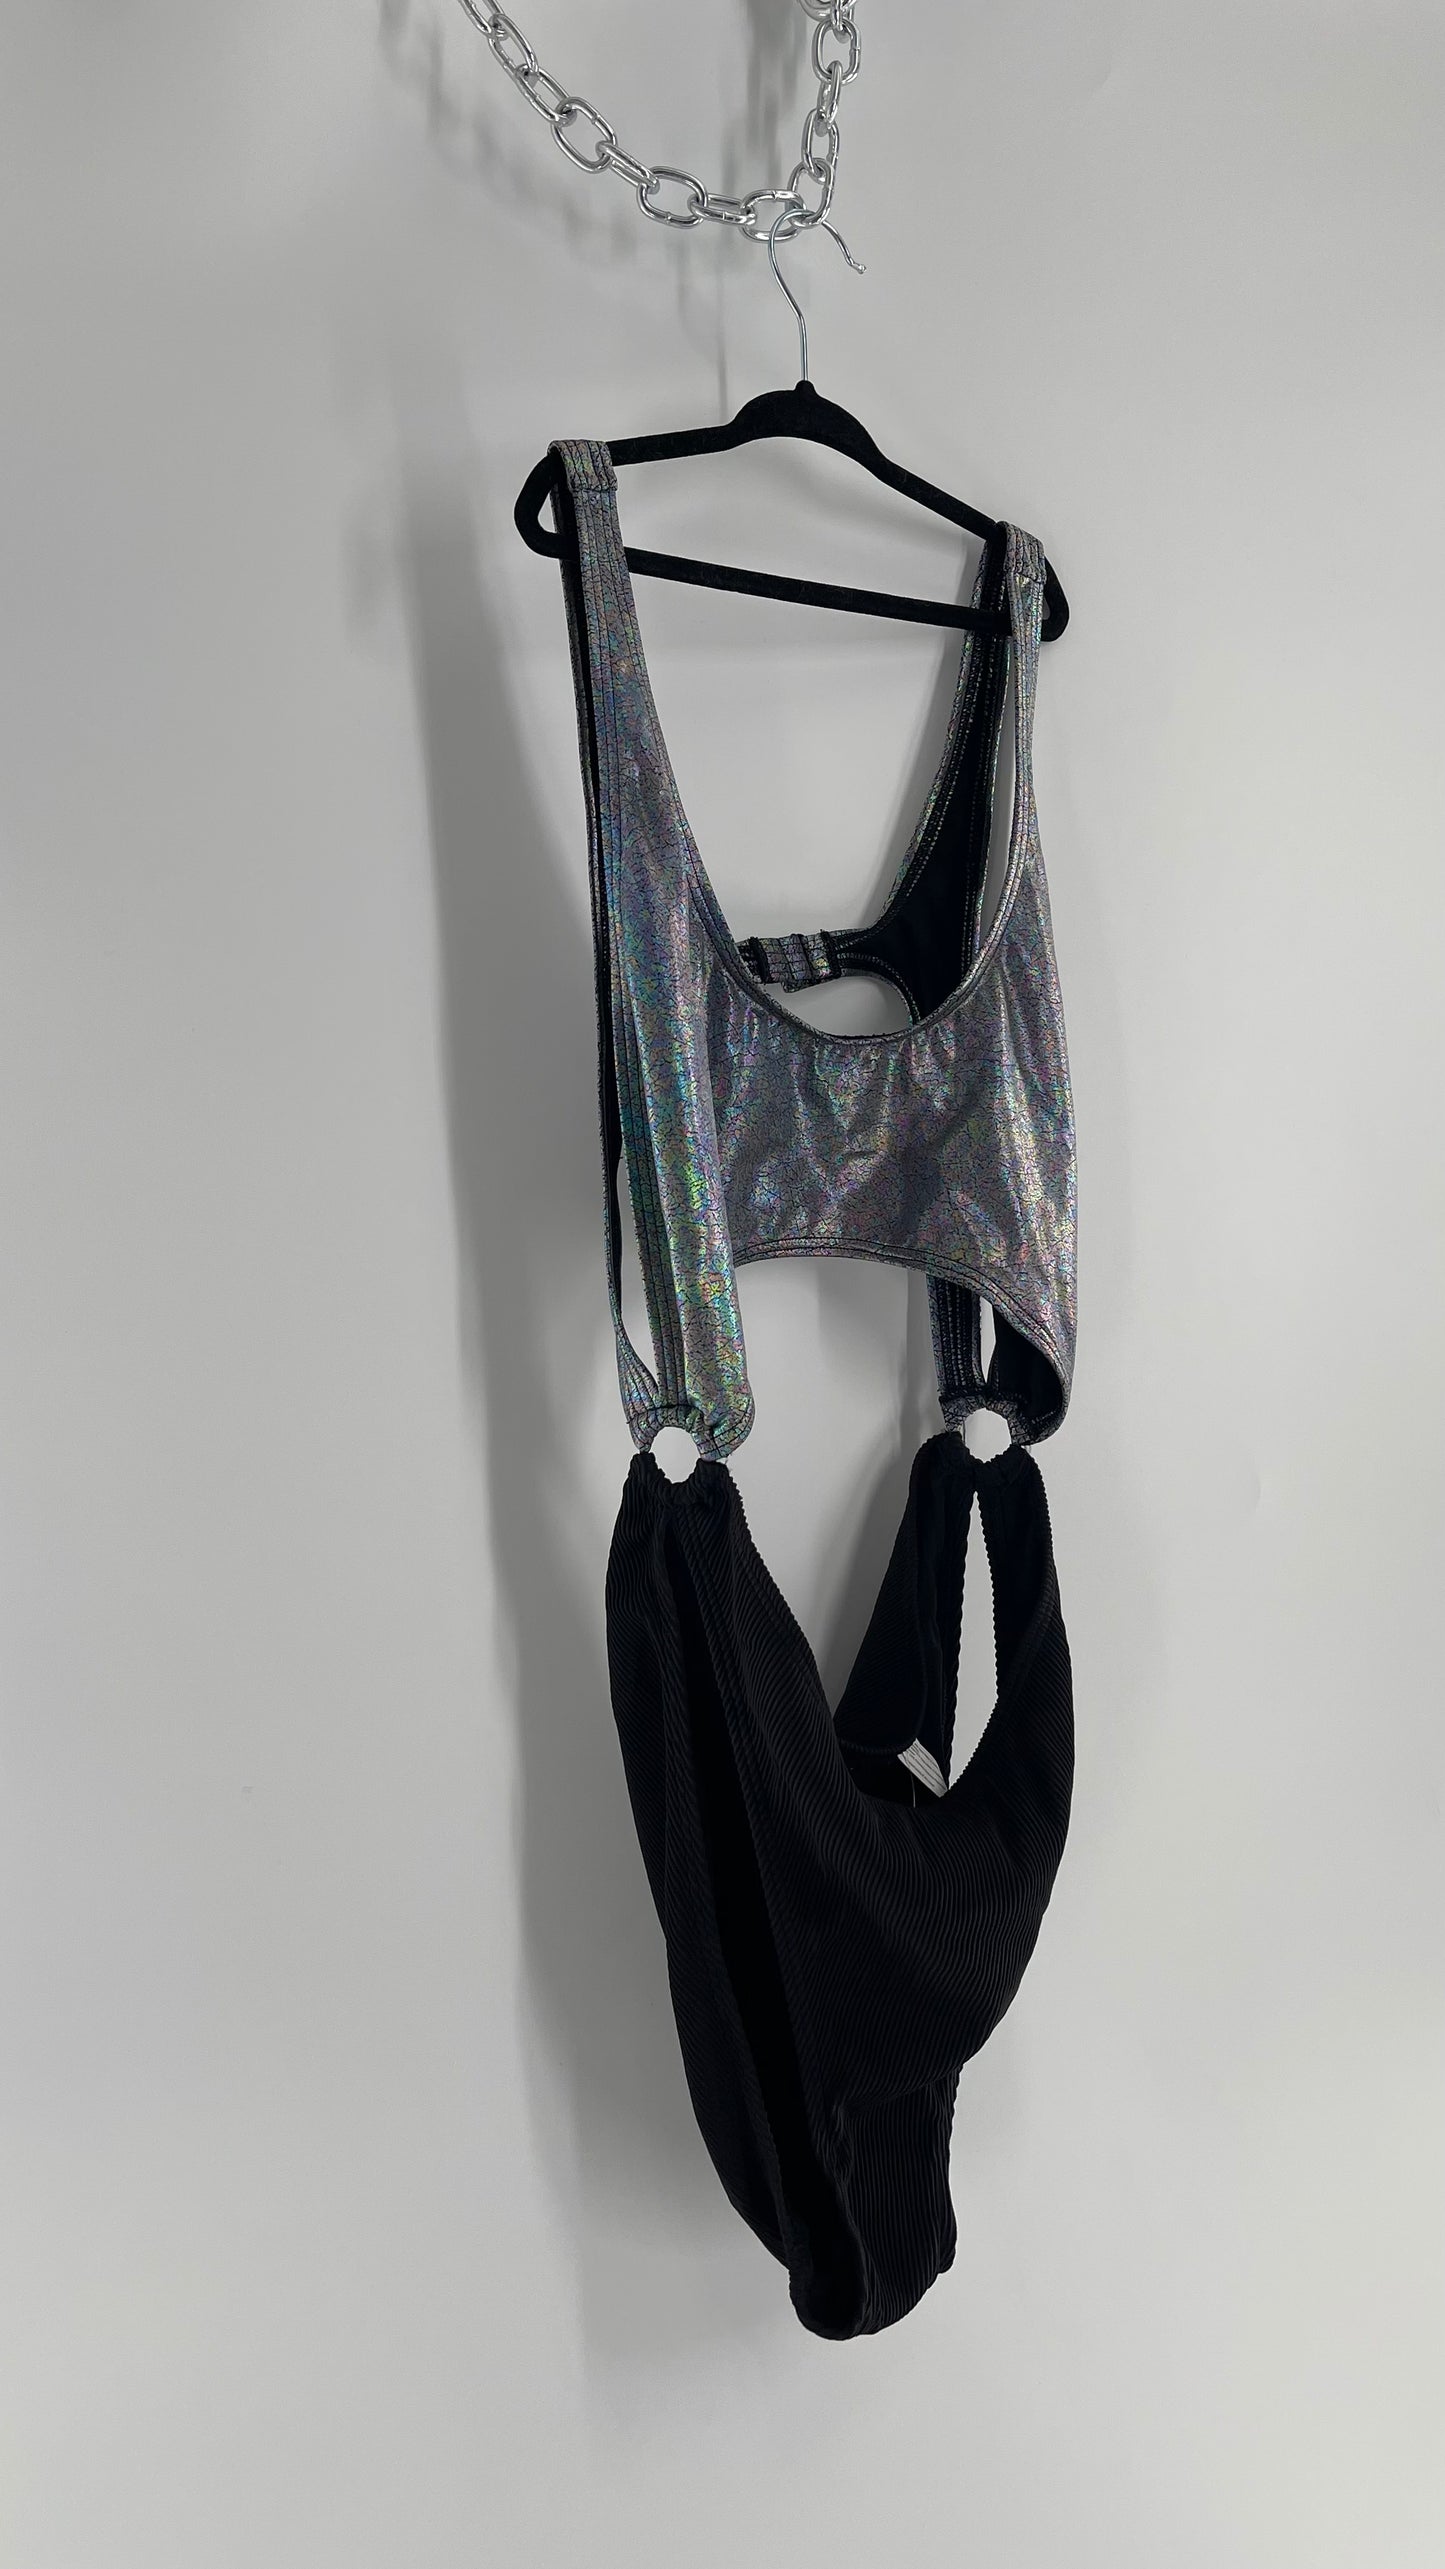 Urban Outfitters Out From Under Bathing Suit Metallic Gas Spill Top and Ribbed Black Bottom Connected by Rings (Large)